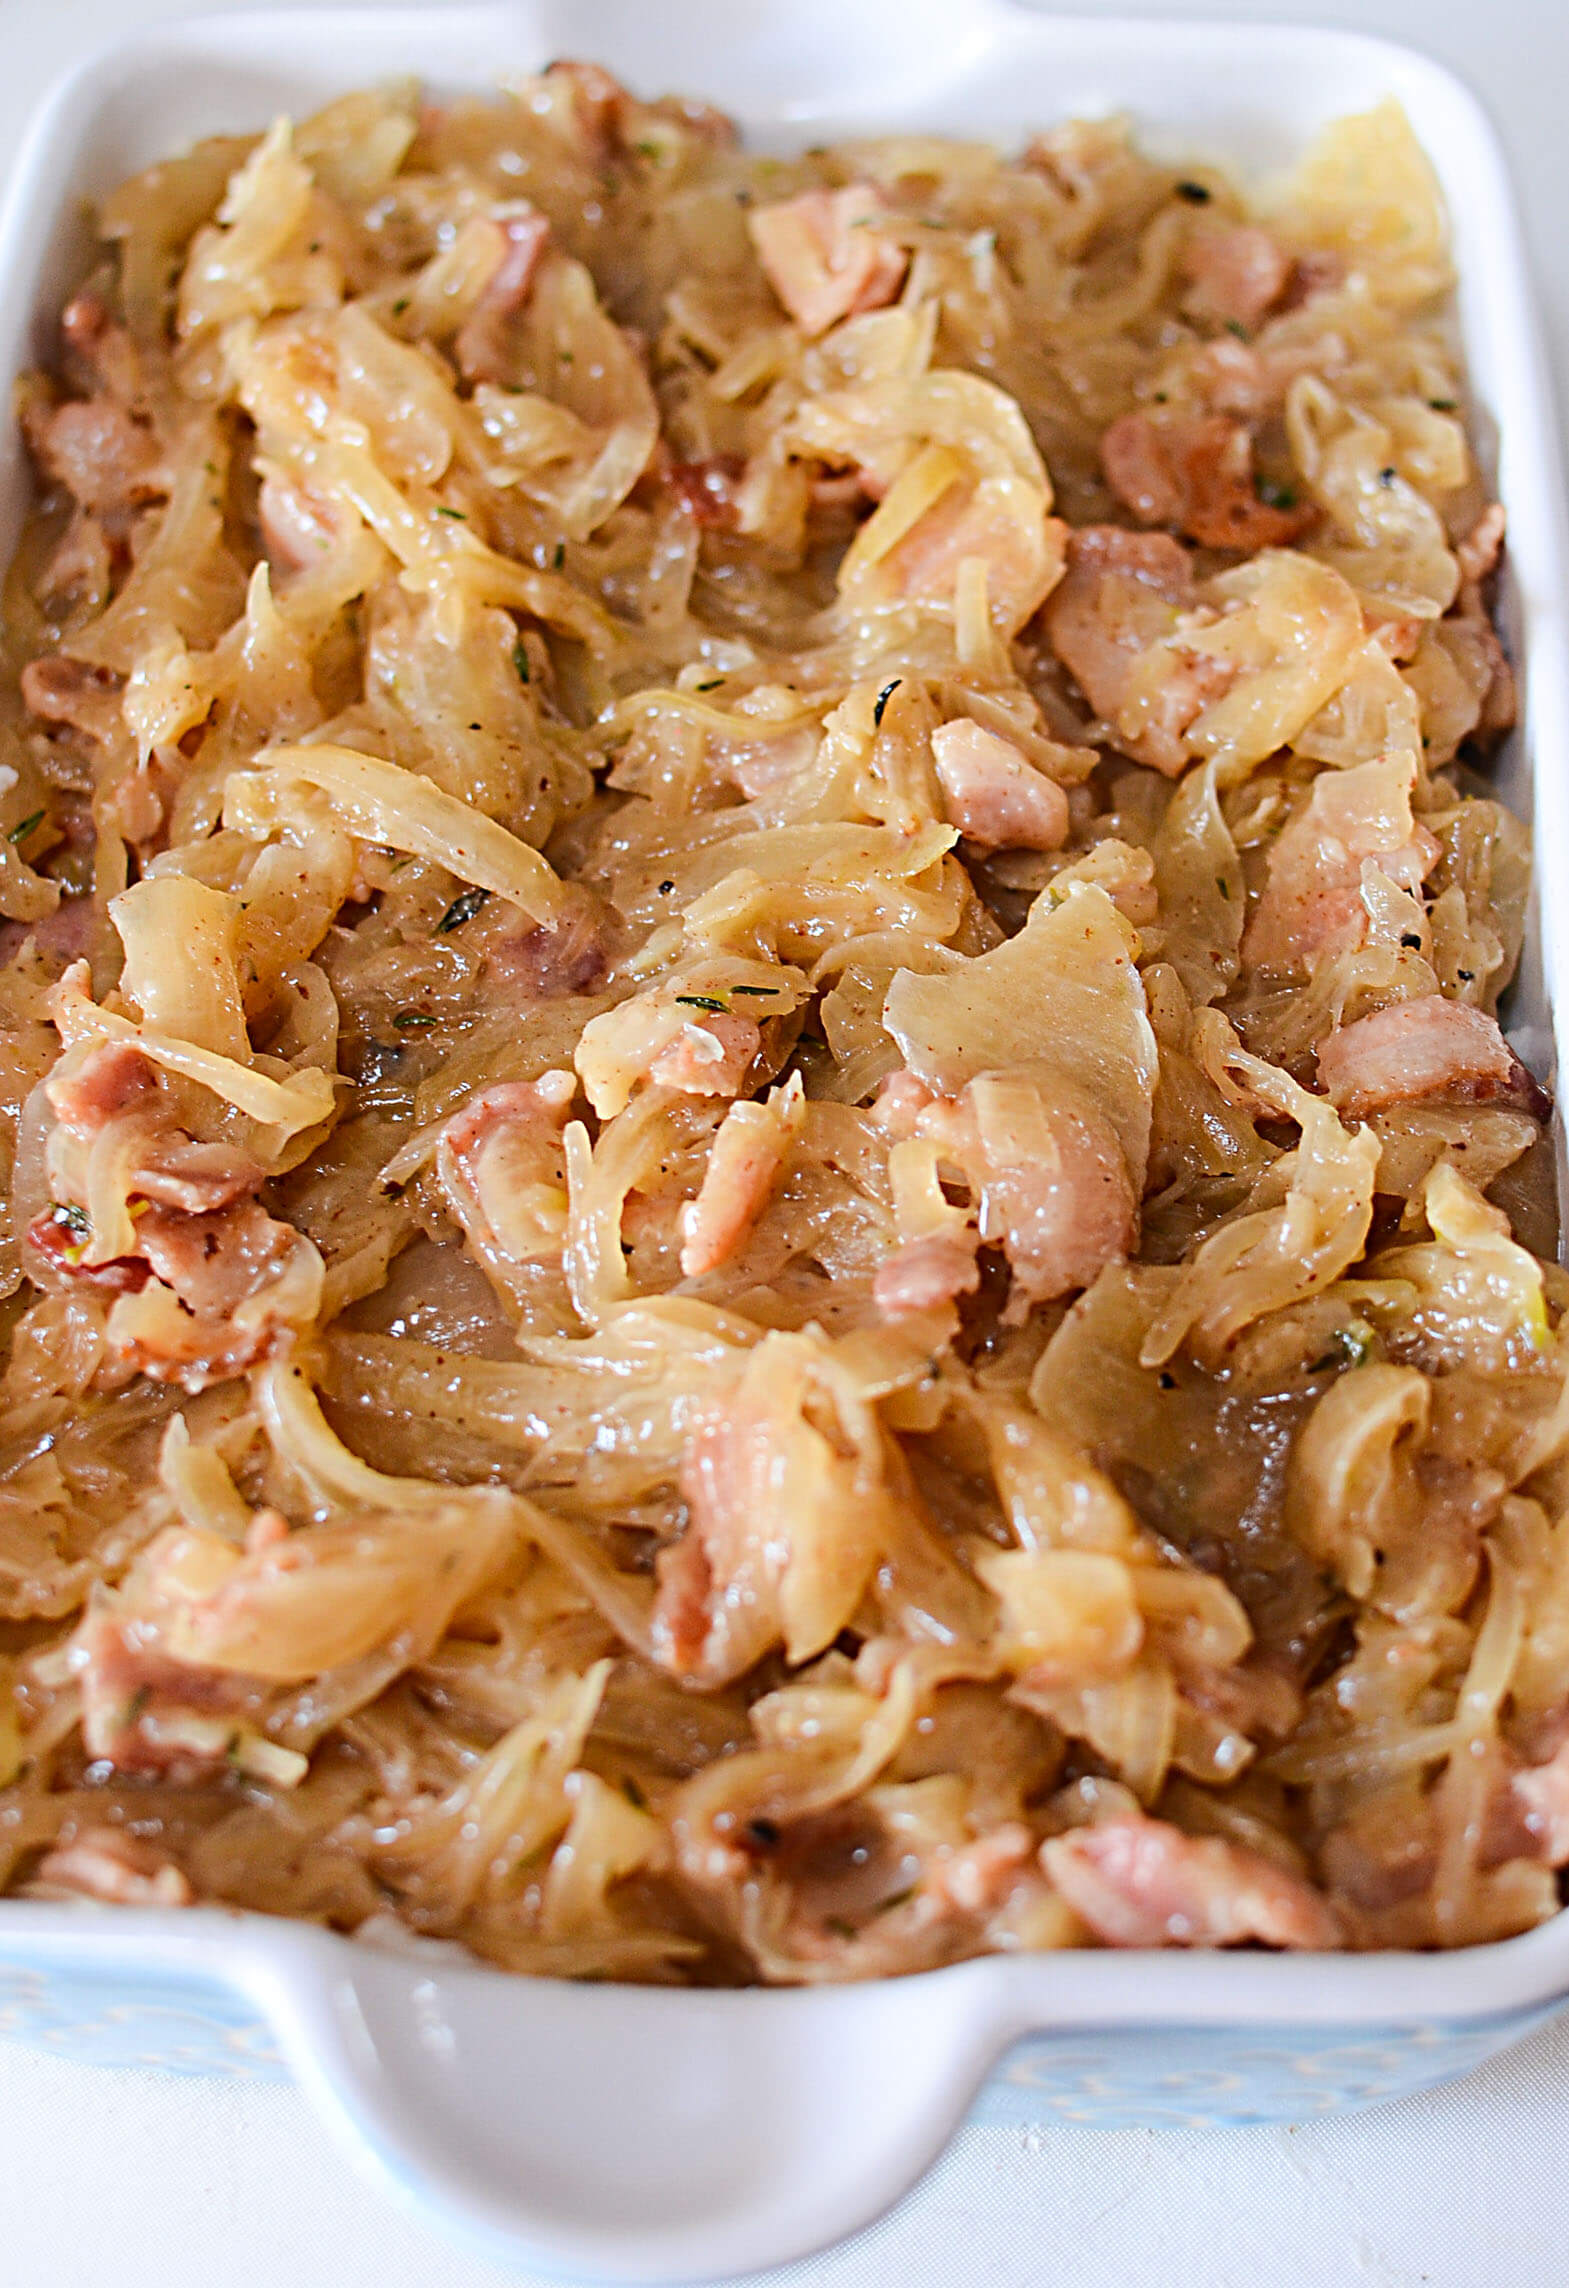 The bacon and onion mixture placed on top of the potatoes. 